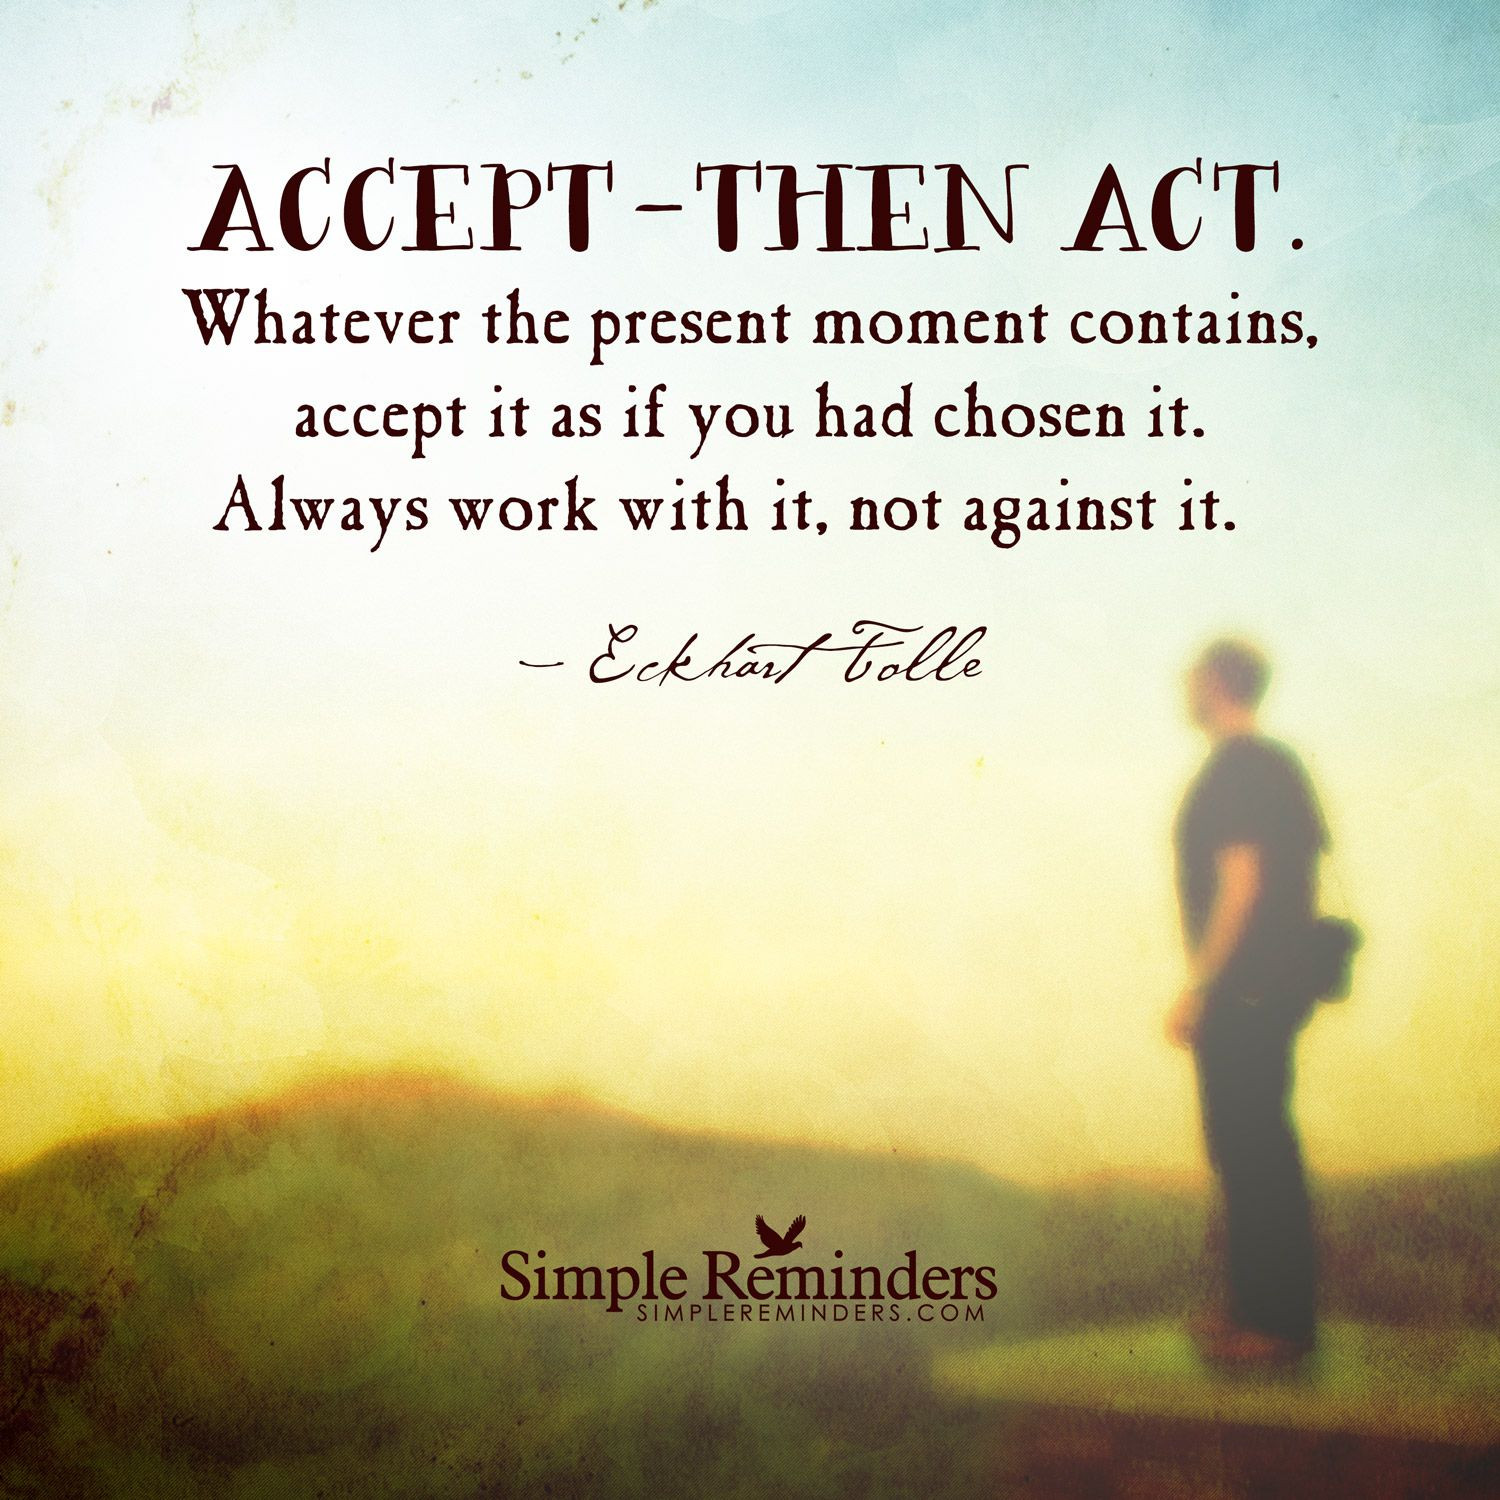 Quote About Living Life In The Moment
 Accept — then act Whatever the present moment contains